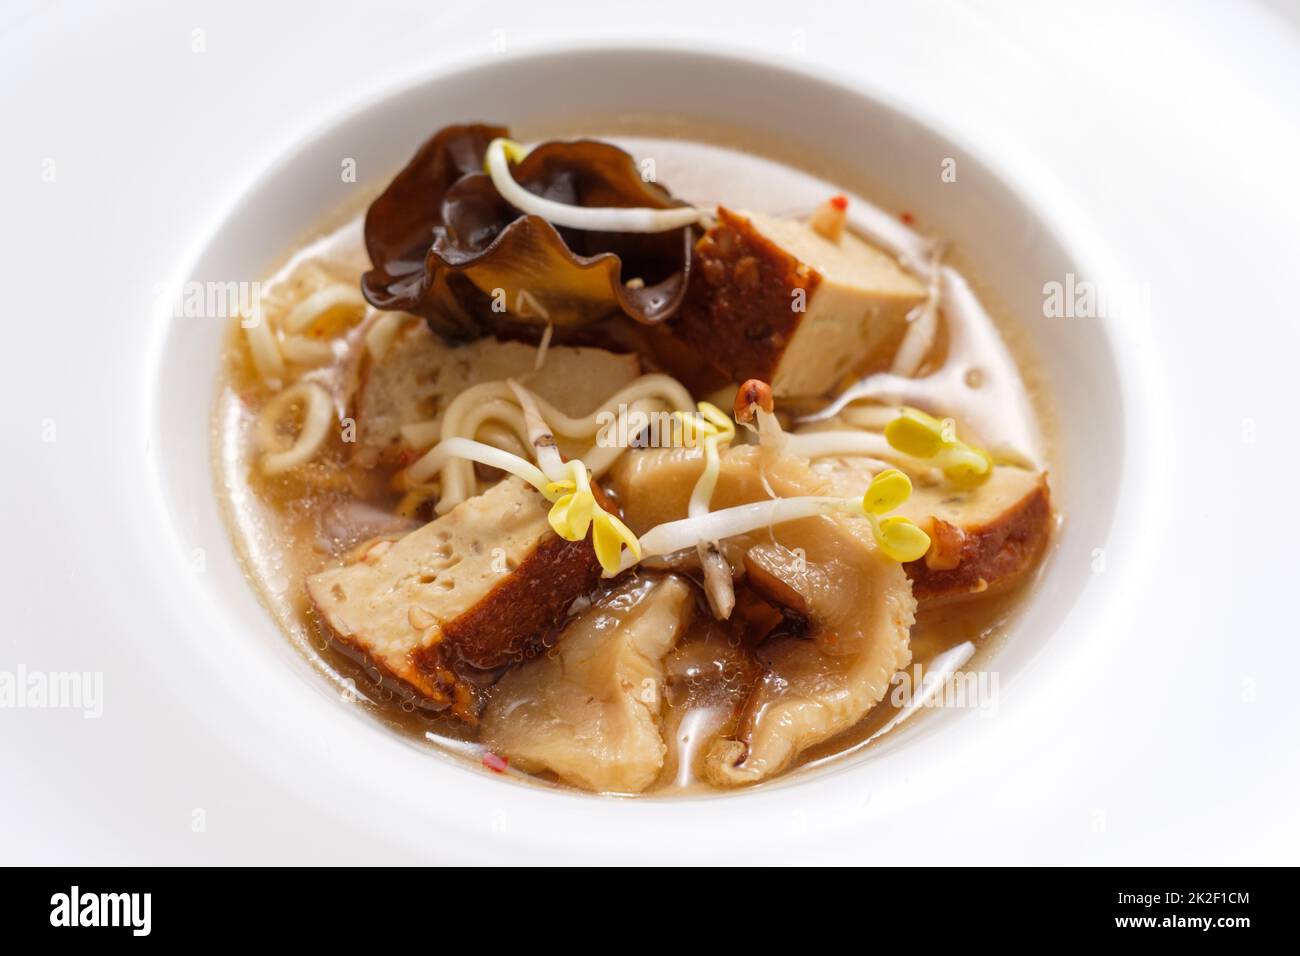 Japanese ramen soup with broth tofu and noodles Stock Photo